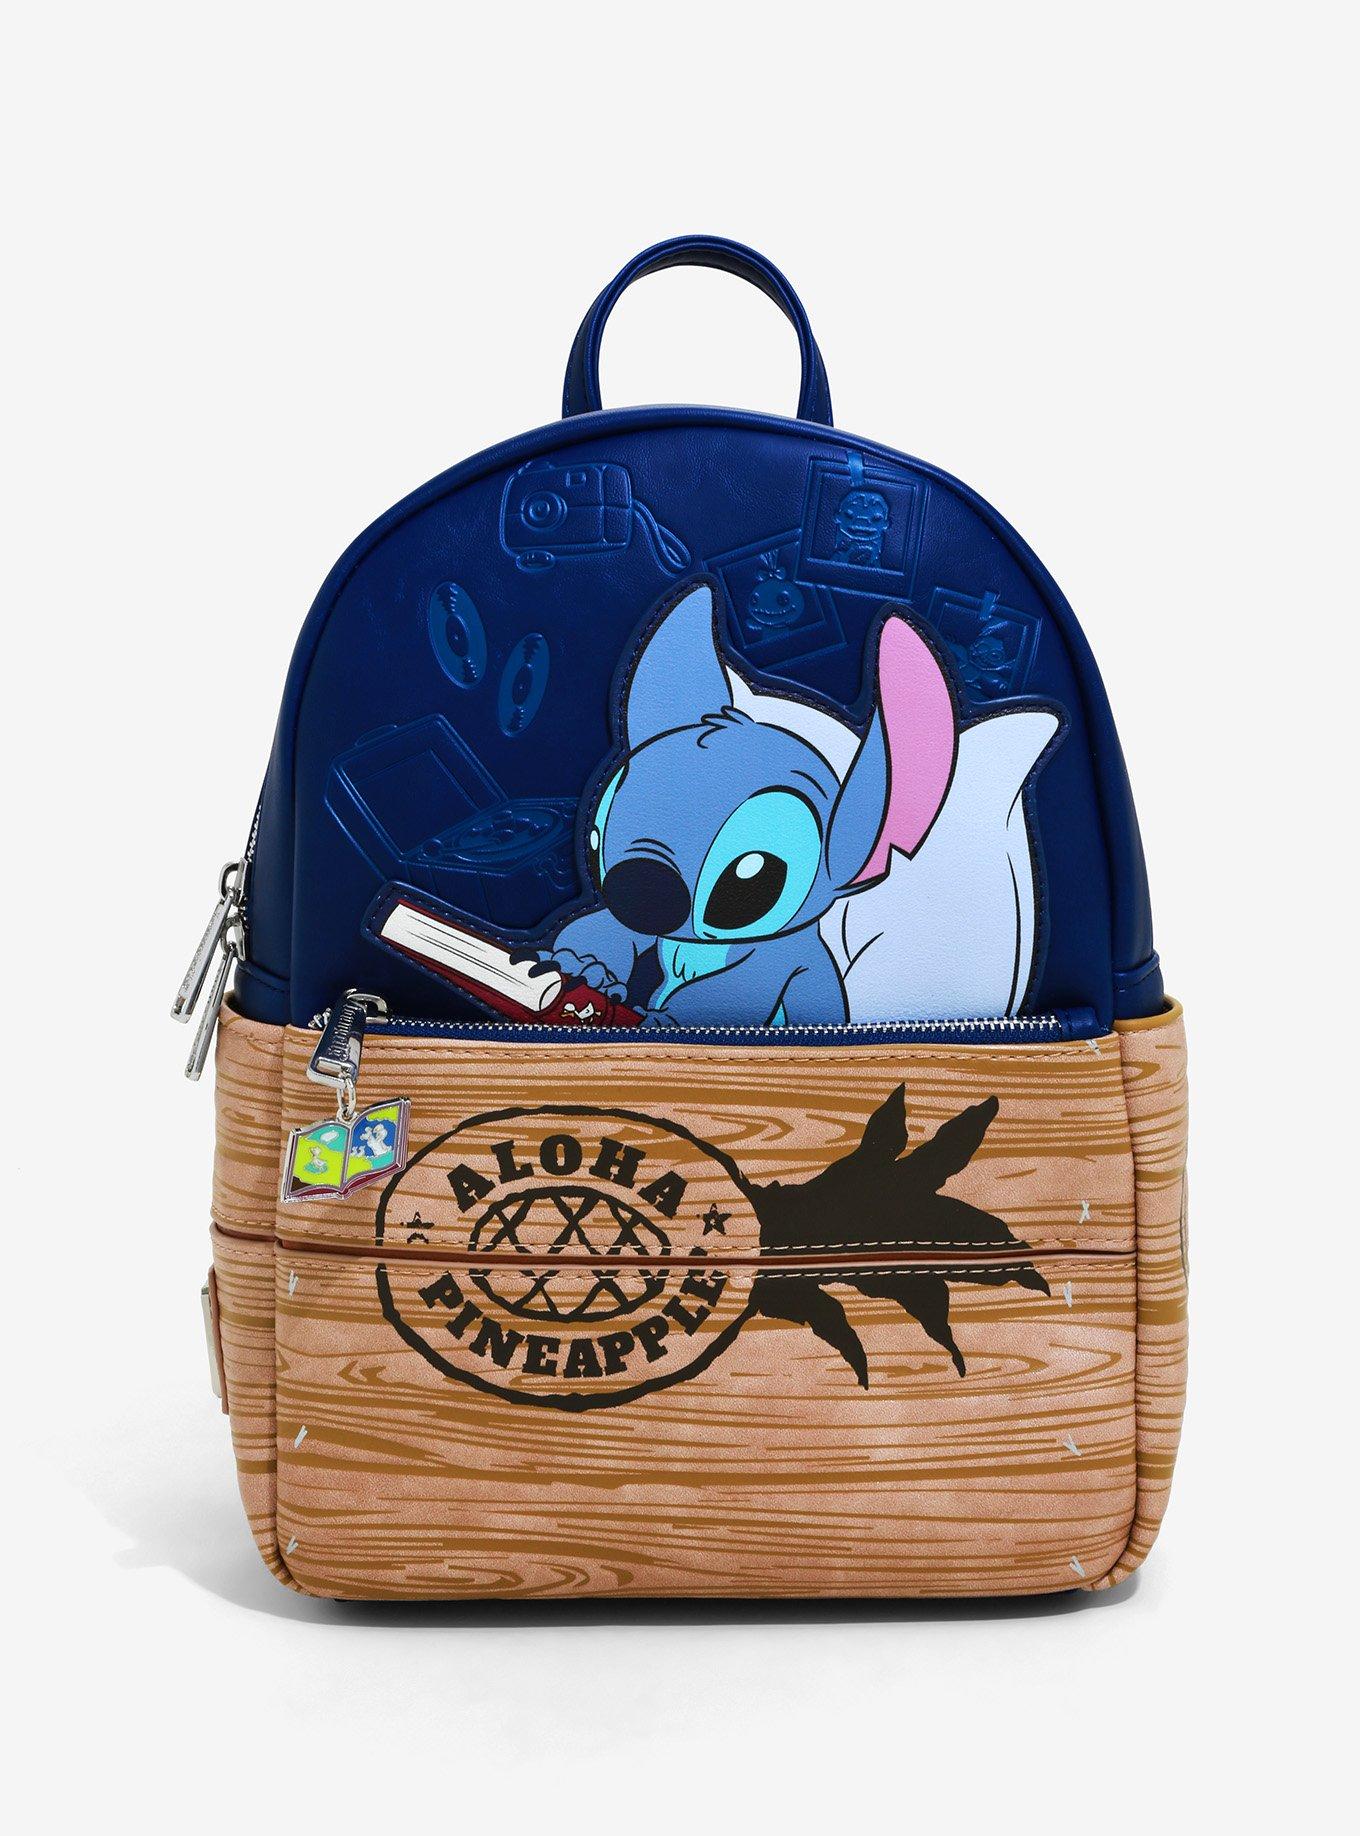 Disney's Maleficent Loungefly Backpack for Sale in Hawaiian